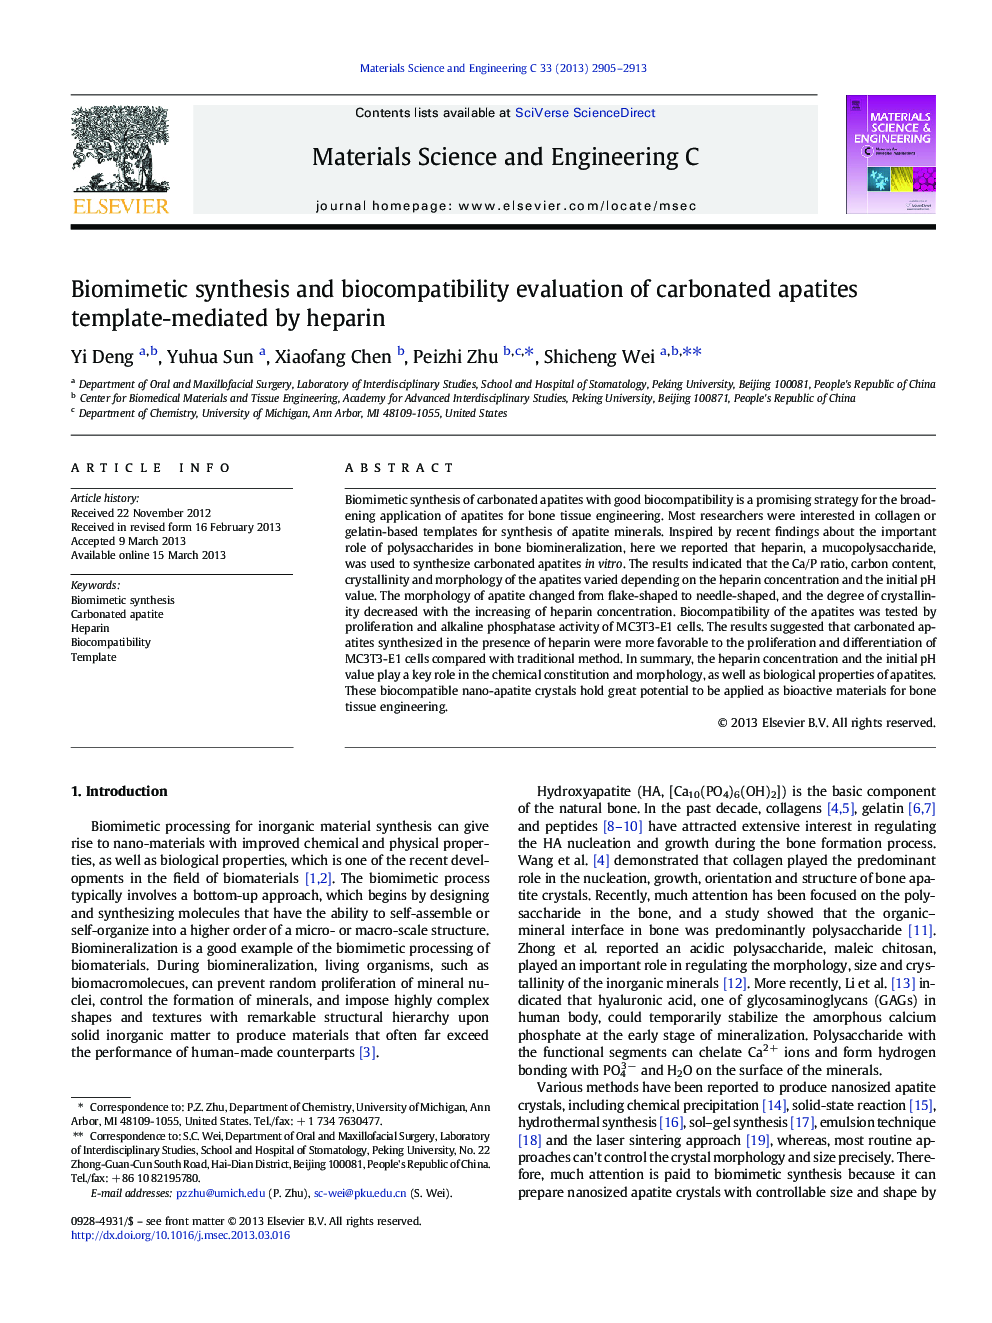 Biomimetic synthesis and biocompatibility evaluation of carbonated apatites template-mediated by heparin